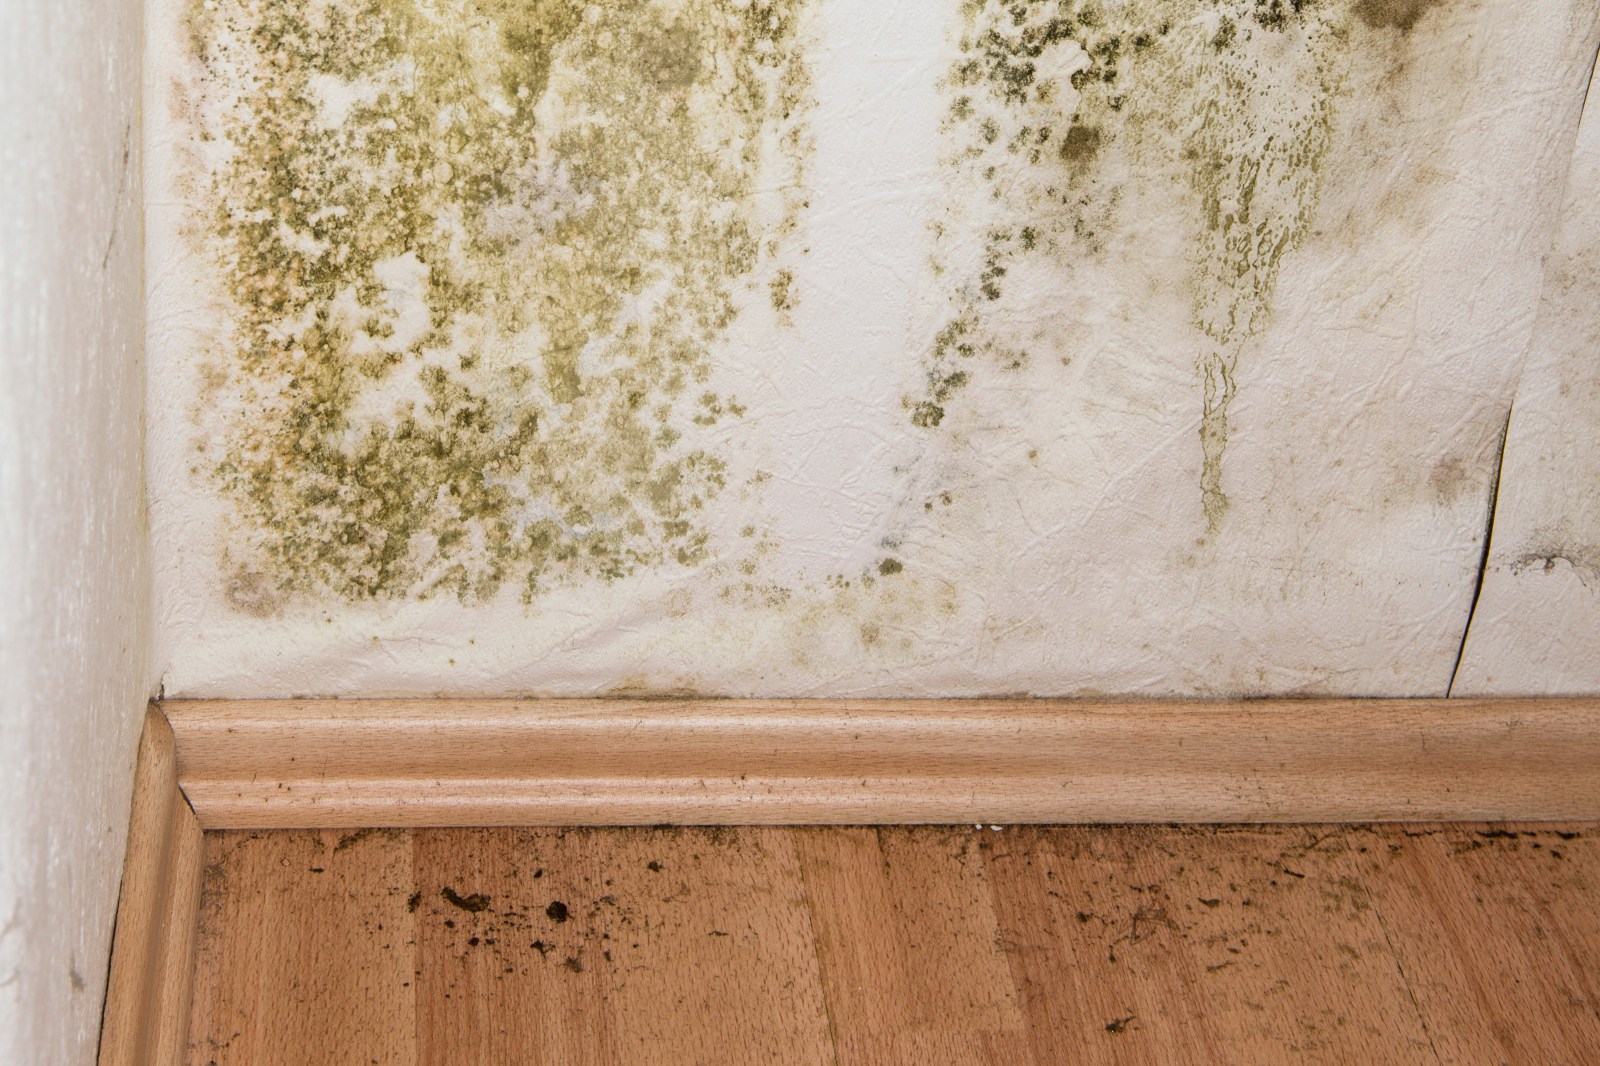 How Much Does Professional Mold Removal Cost?